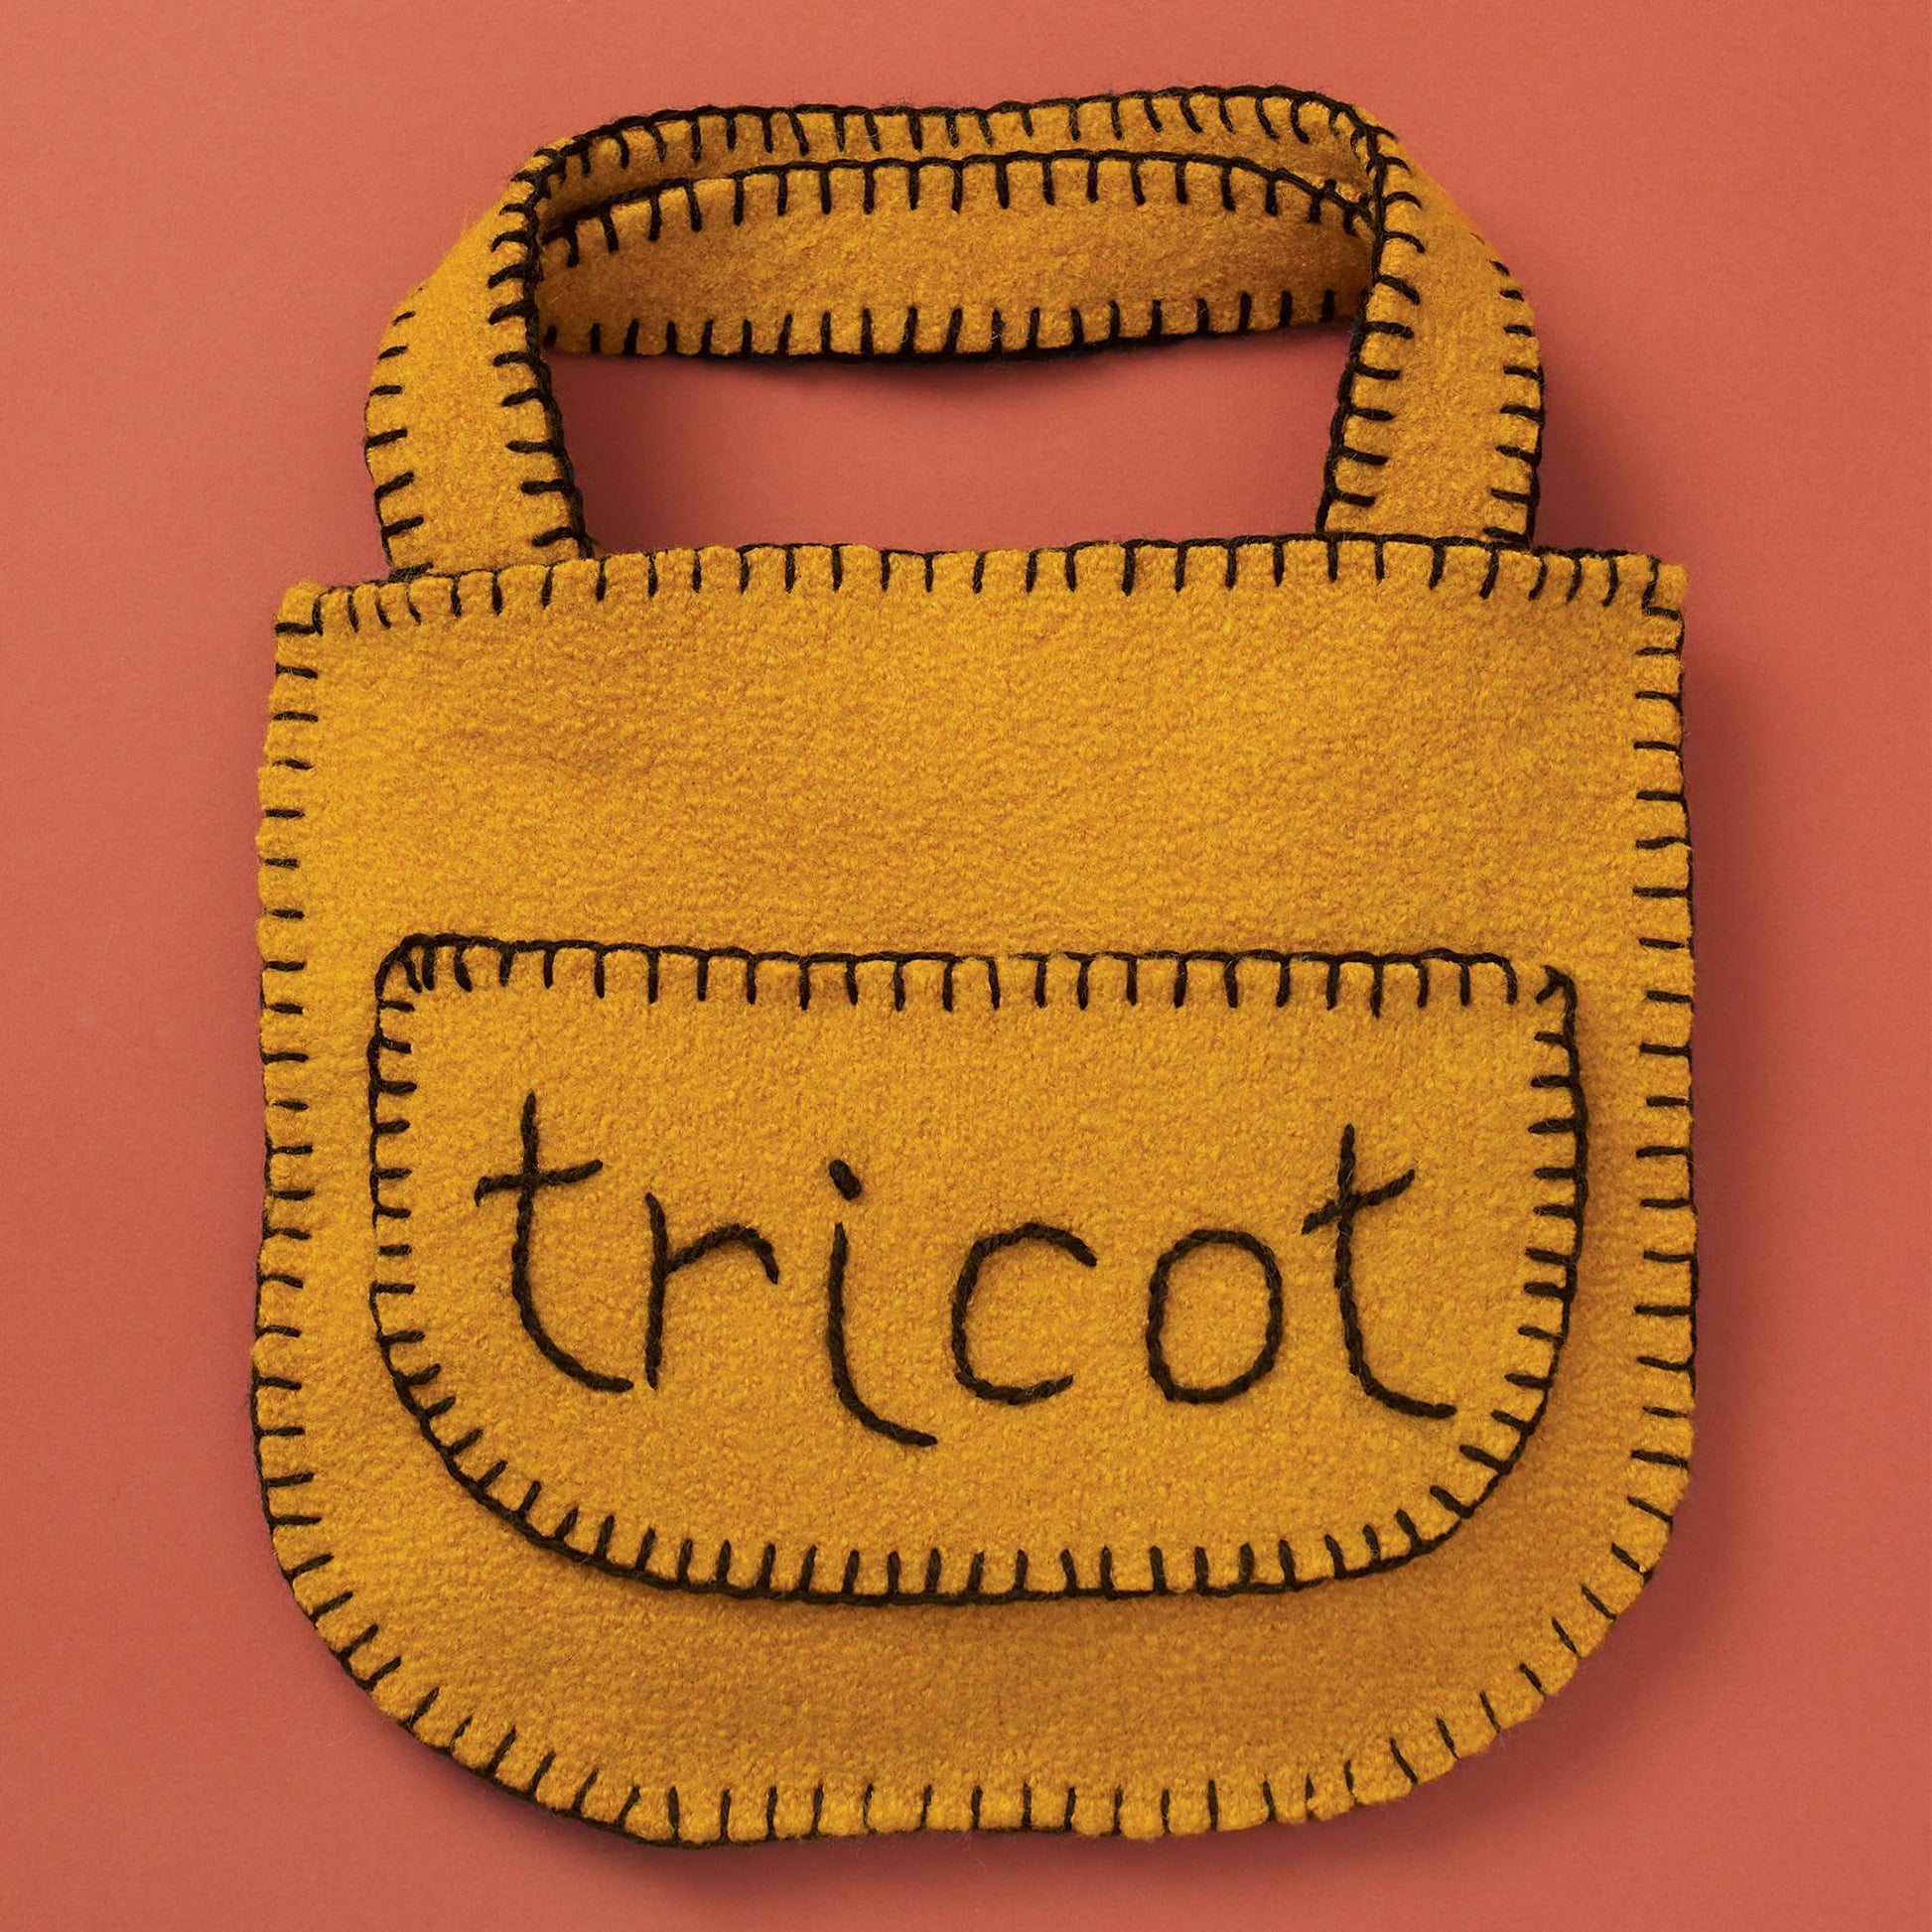 Free Patons Felted "Tricot" Bag Knit Pattern